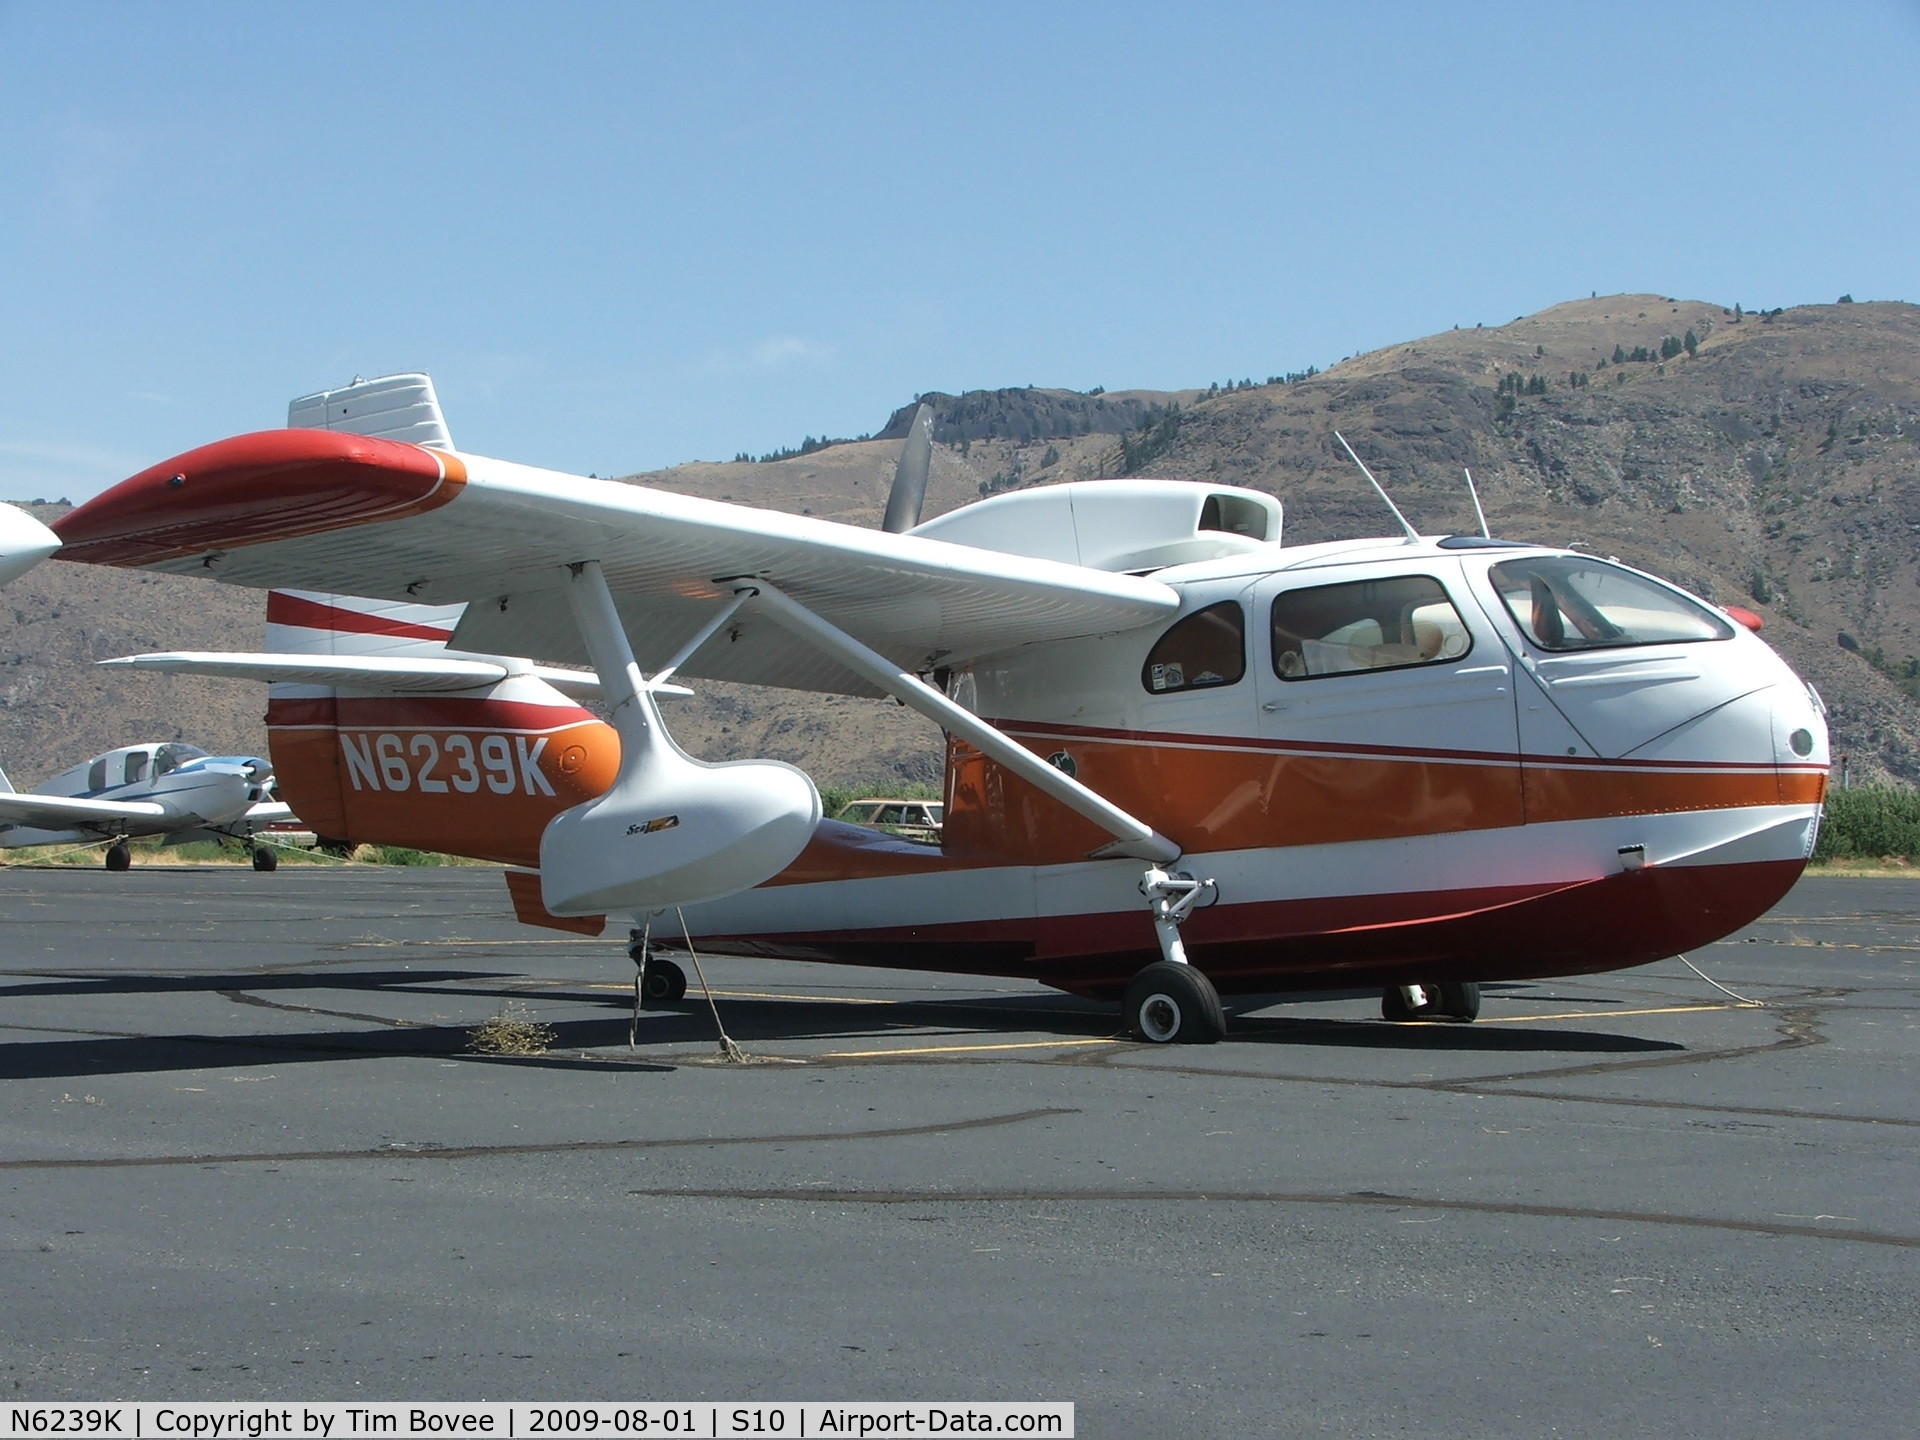 N6239K, 1947 Republic RC-3 Seabee C/N 442, Fish out of water